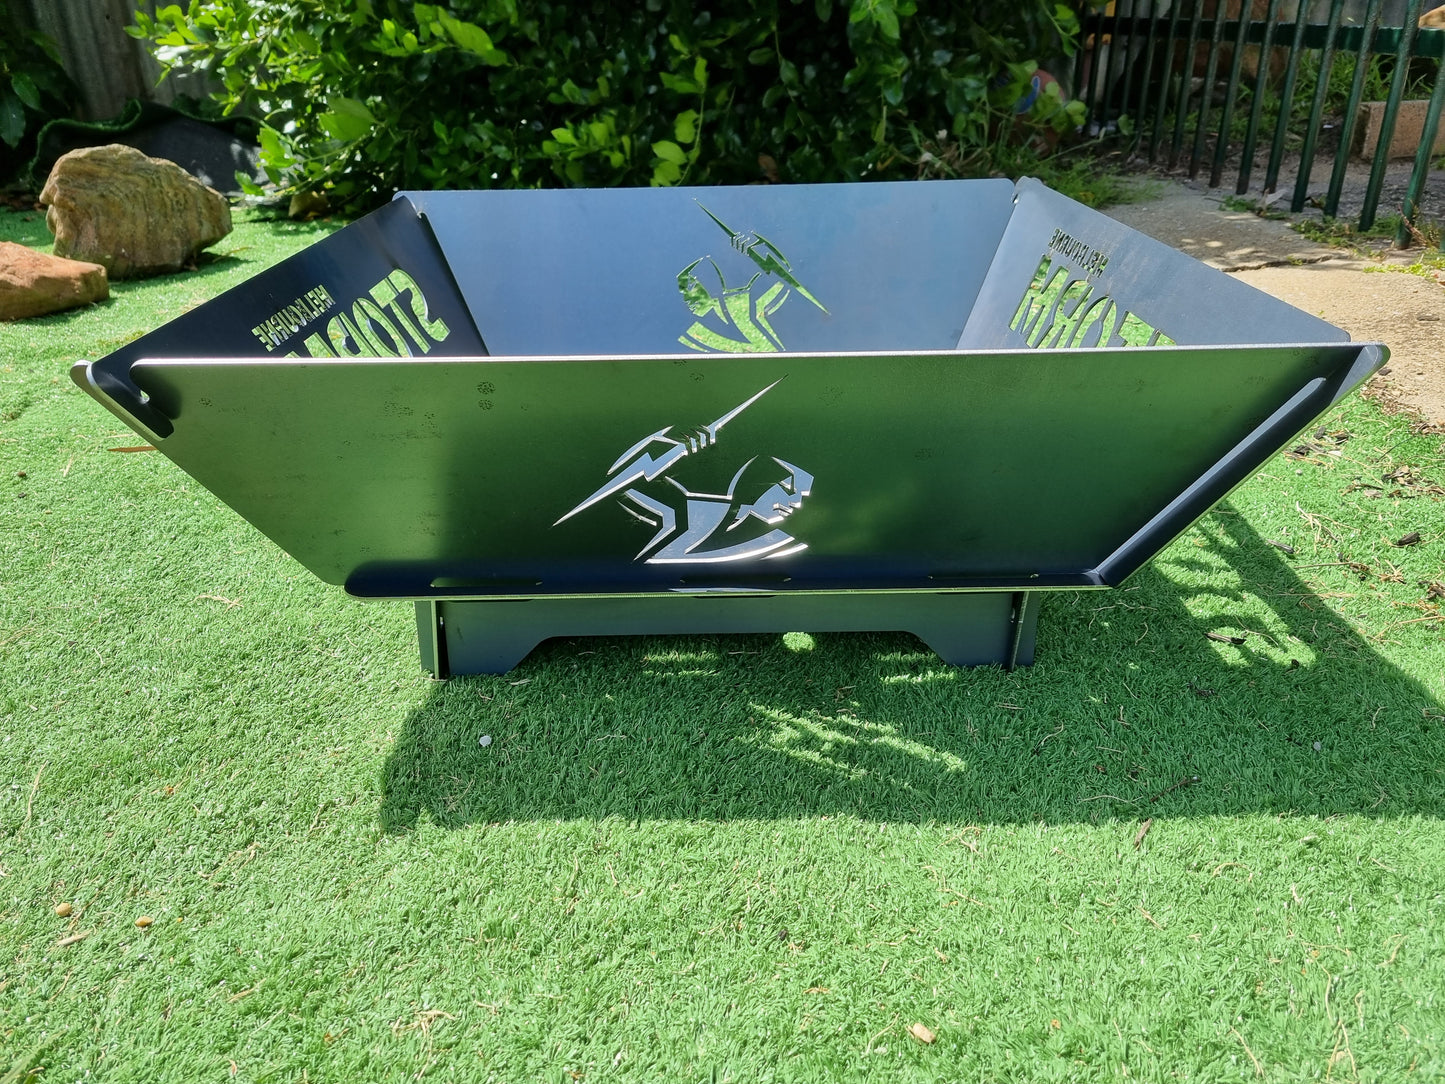 Melbourne Storm NRL Fire Pit Collapsible 3mm Thick Australian Steel